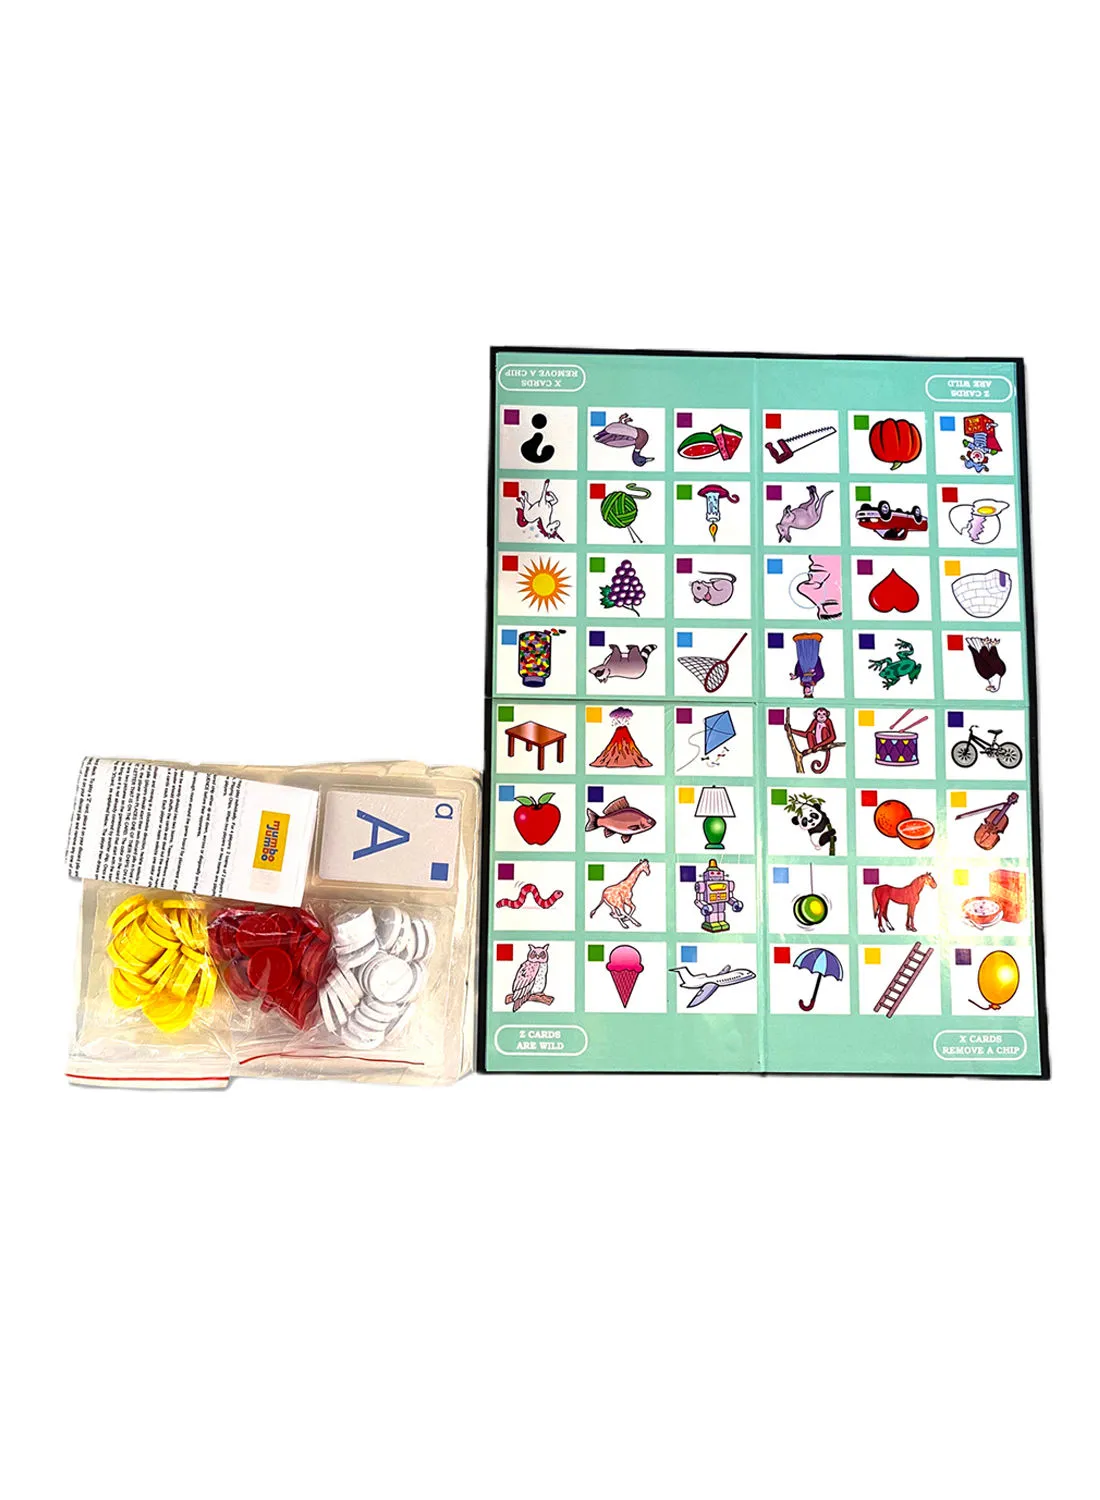 mumbo Jumbo Finest Quality Animal Sequence Card Game, Sequence Fun From A To Z For Kids 4 Years And Above, With Guiding Manual 25.5 x 20 x 5.5cm